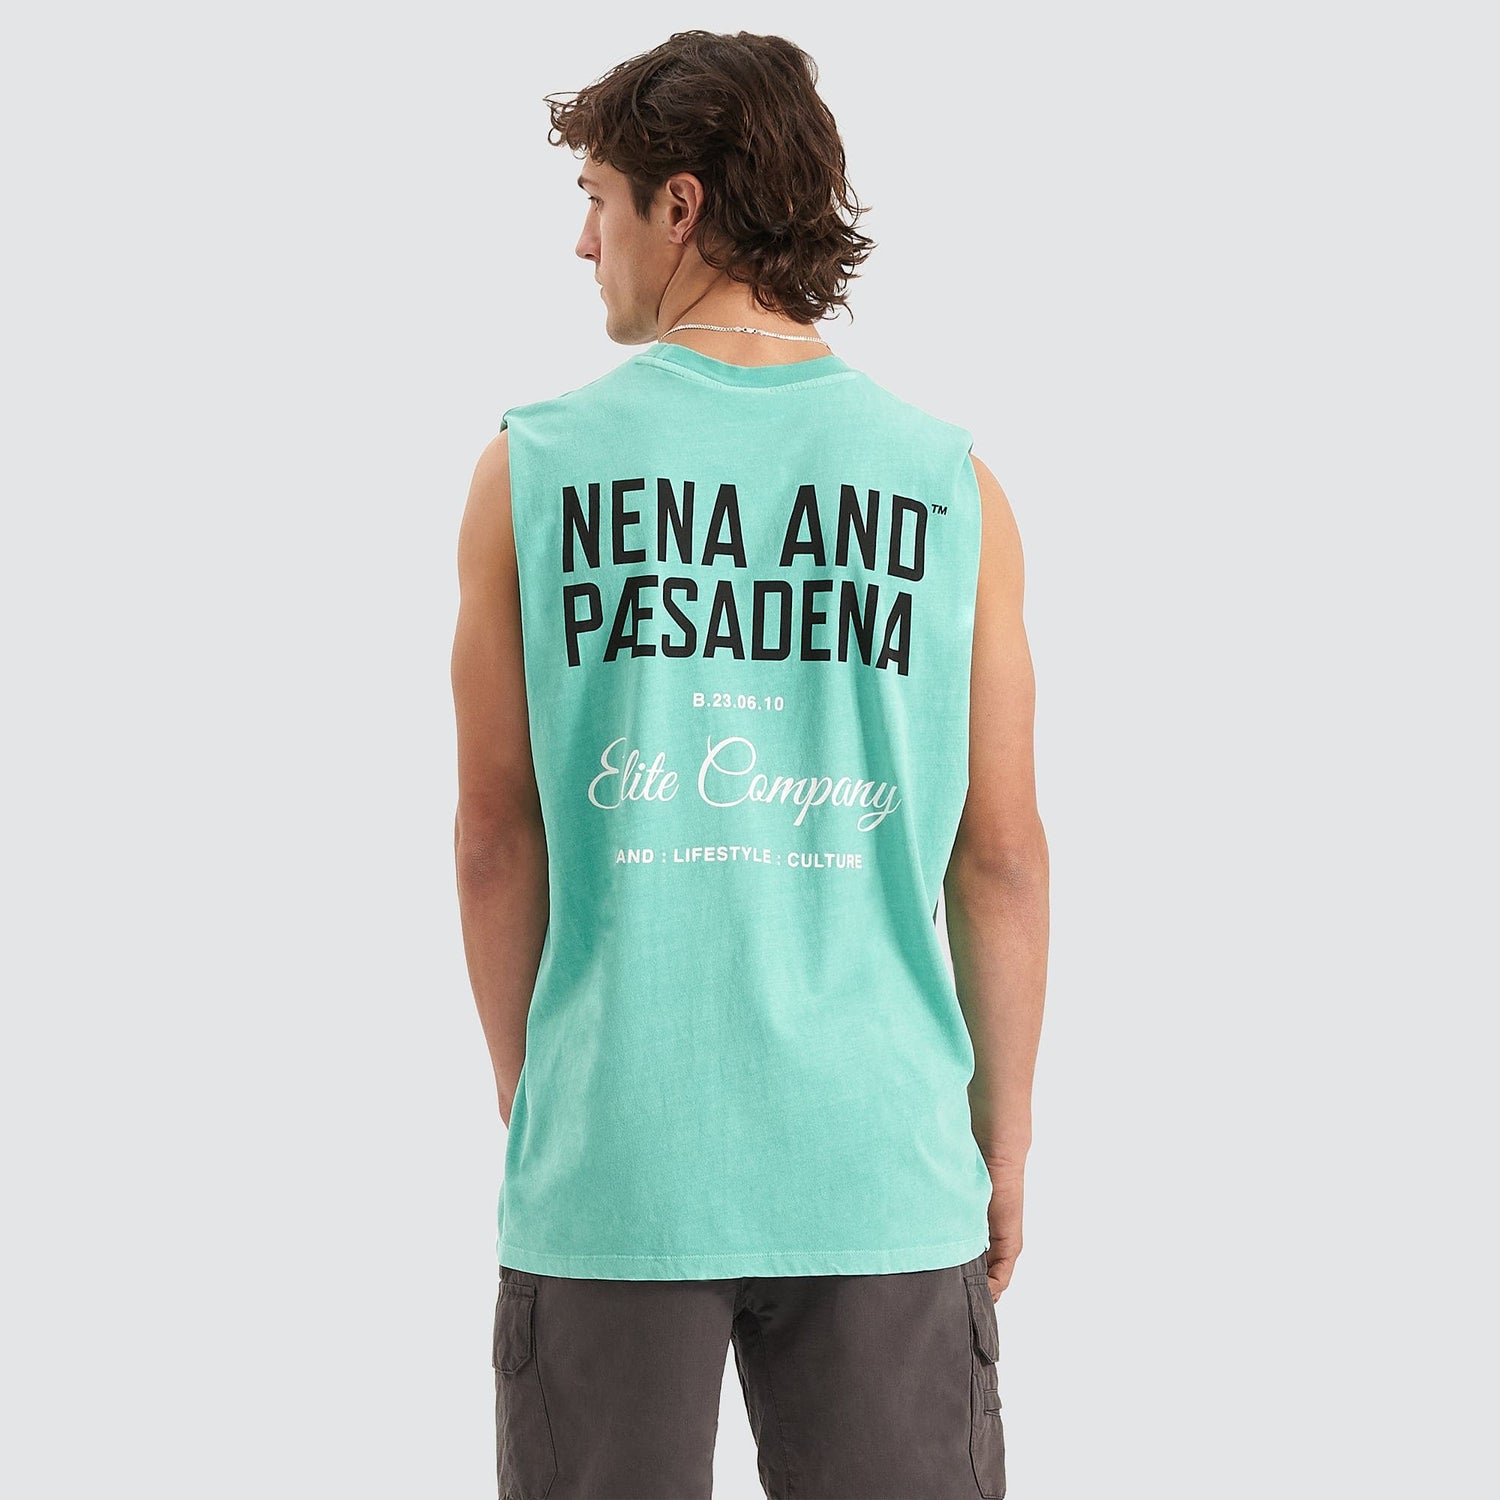 Hesitation Relaxed Muscle Tee Pigment Mint Green